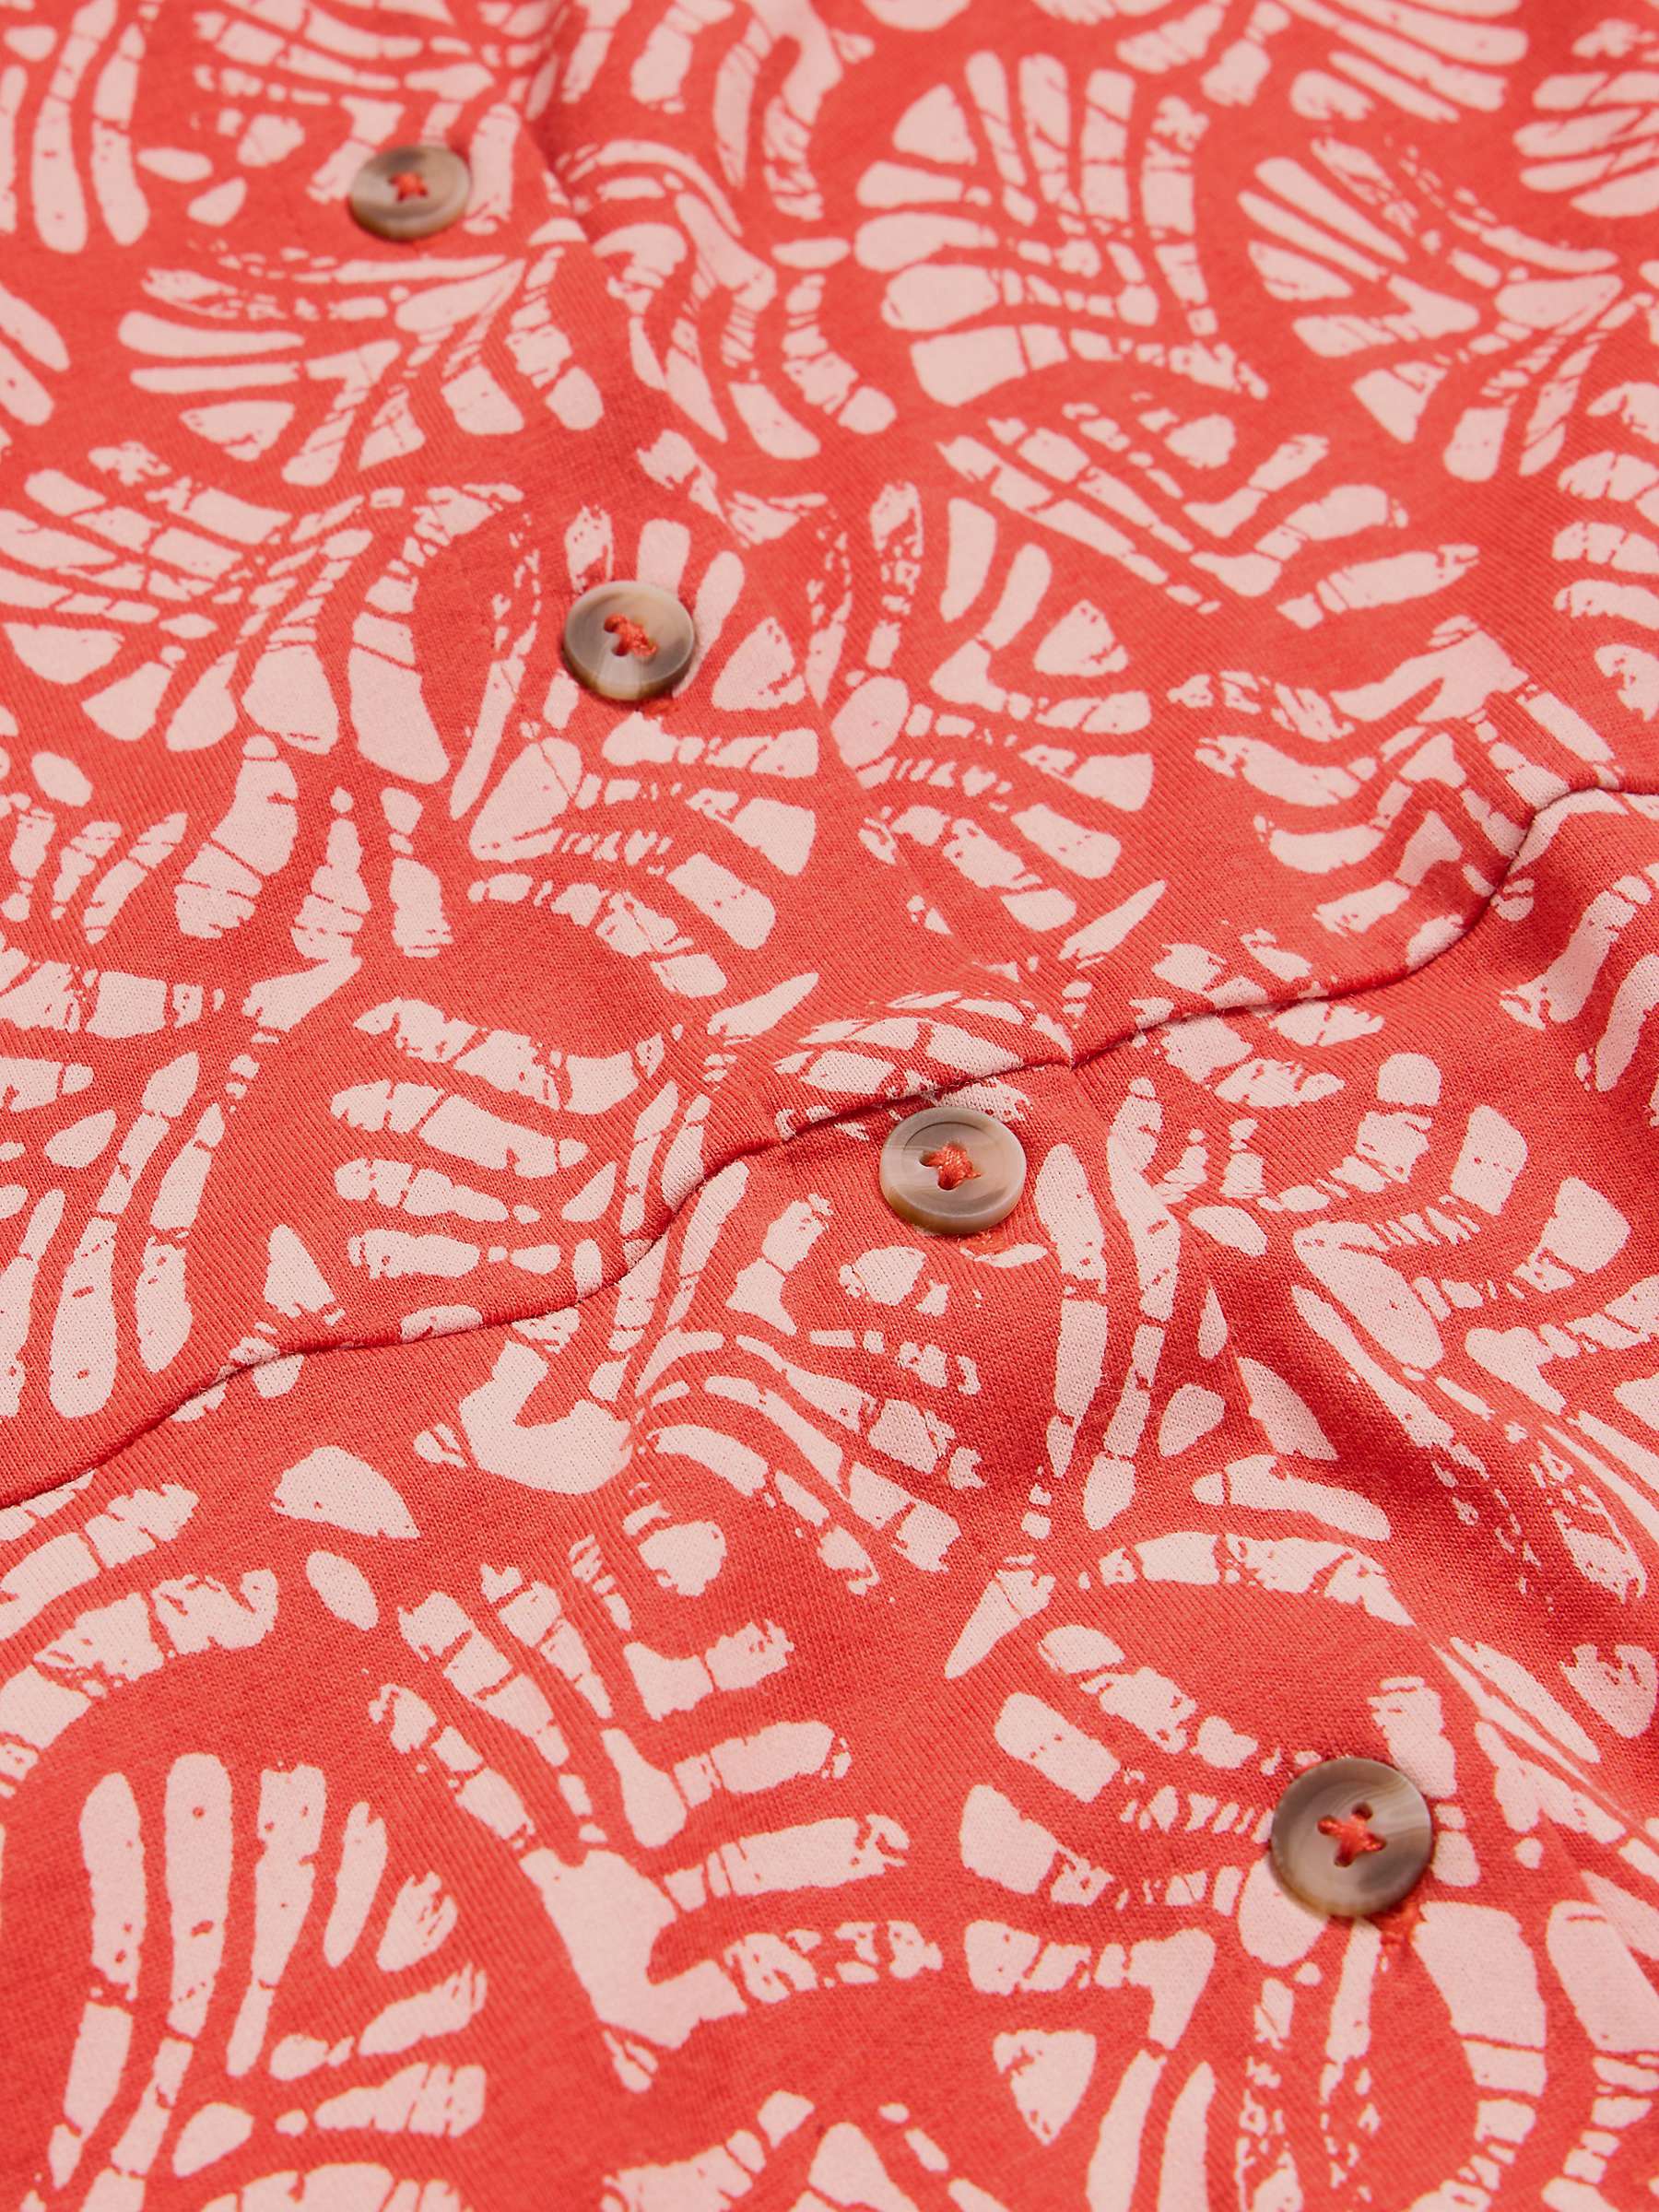 Buy White Stuff Ria Abstract Print Jersey Shirt Dress, Red/White Online at johnlewis.com